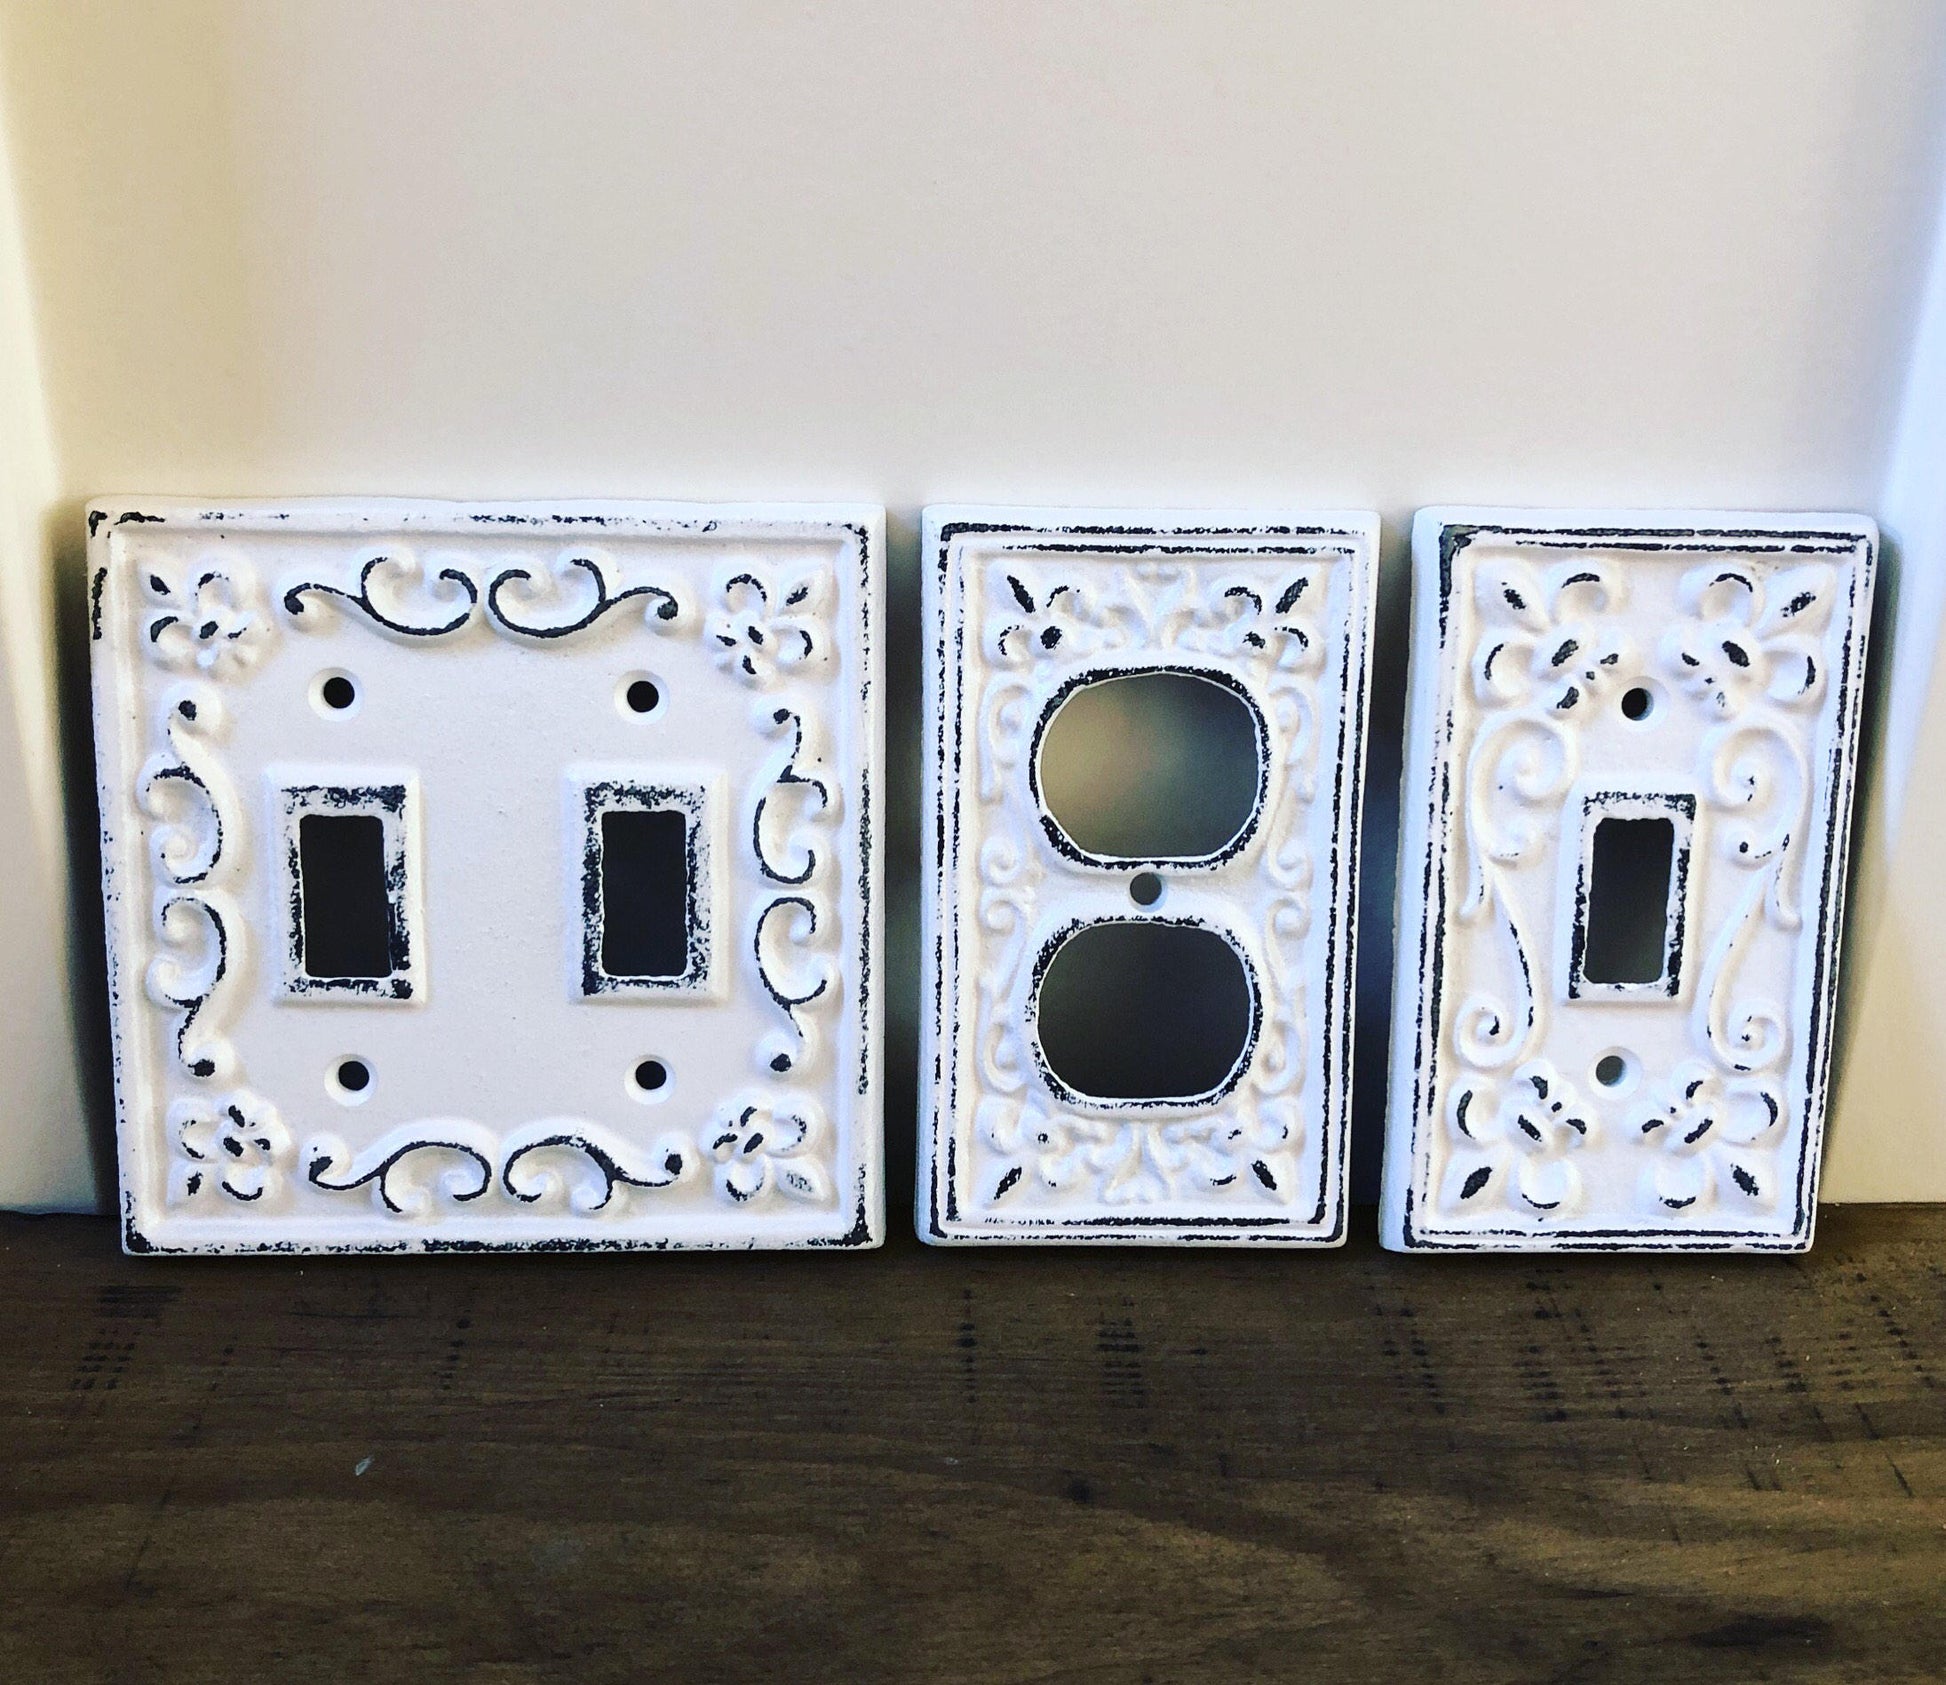 Outlet covers/Cast Iron Double Light Switch Cover/single light switch cover/Nursery/Bedroom/Light Switch Plate/Pick color/Outlet Cover/